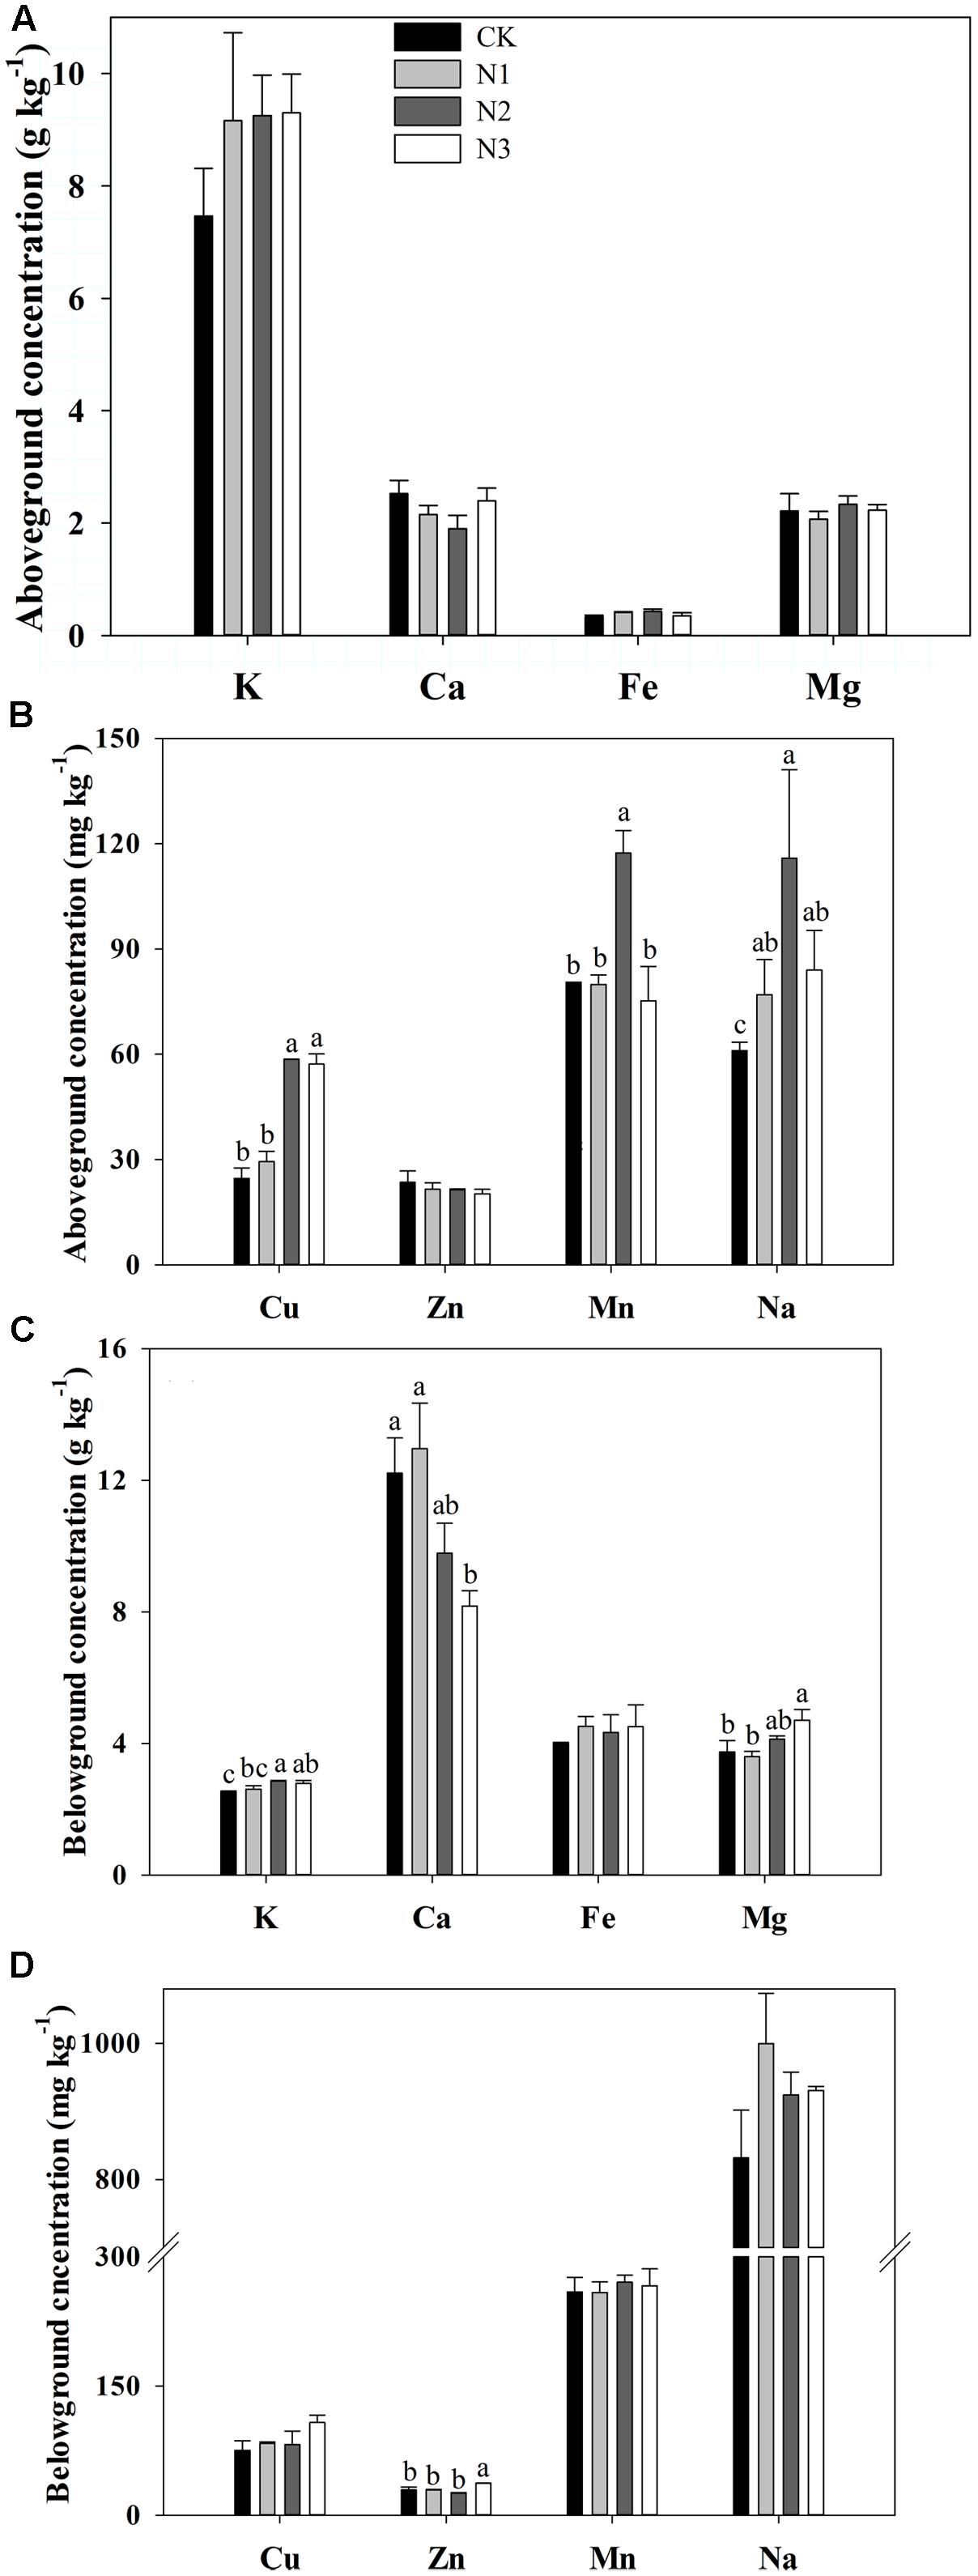 Frontiers The Effects Of Nitrogen Addition On The Uptake And Allocation Of Macro And Micronutrients In Bothriochloa Ischaemum On Loess Plateau In China Plant Science